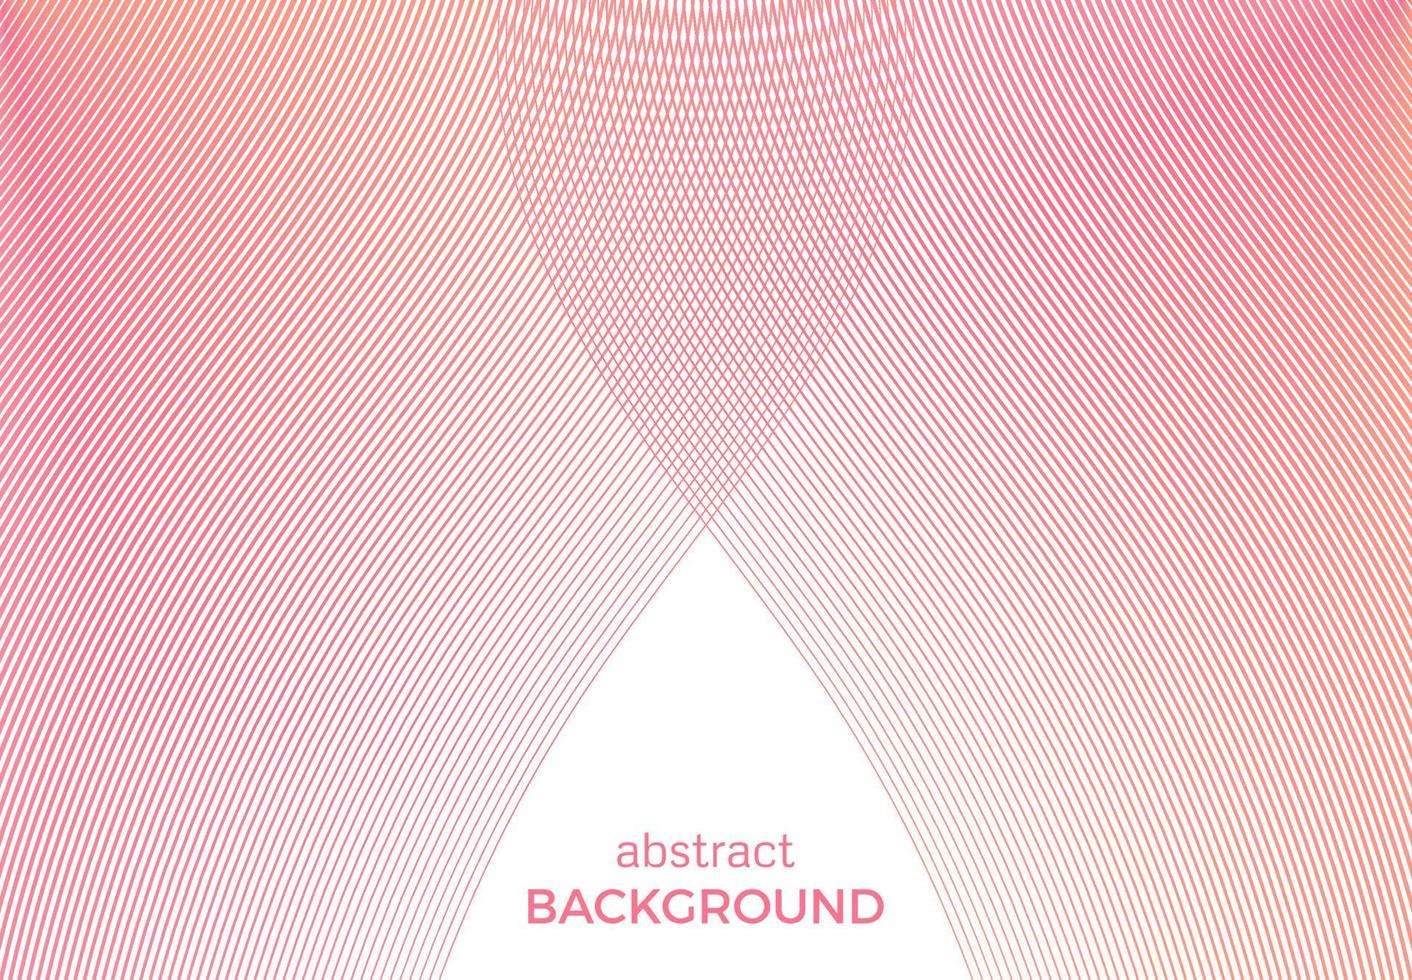 Abstract background with narrow wavy lines. Vector illustration